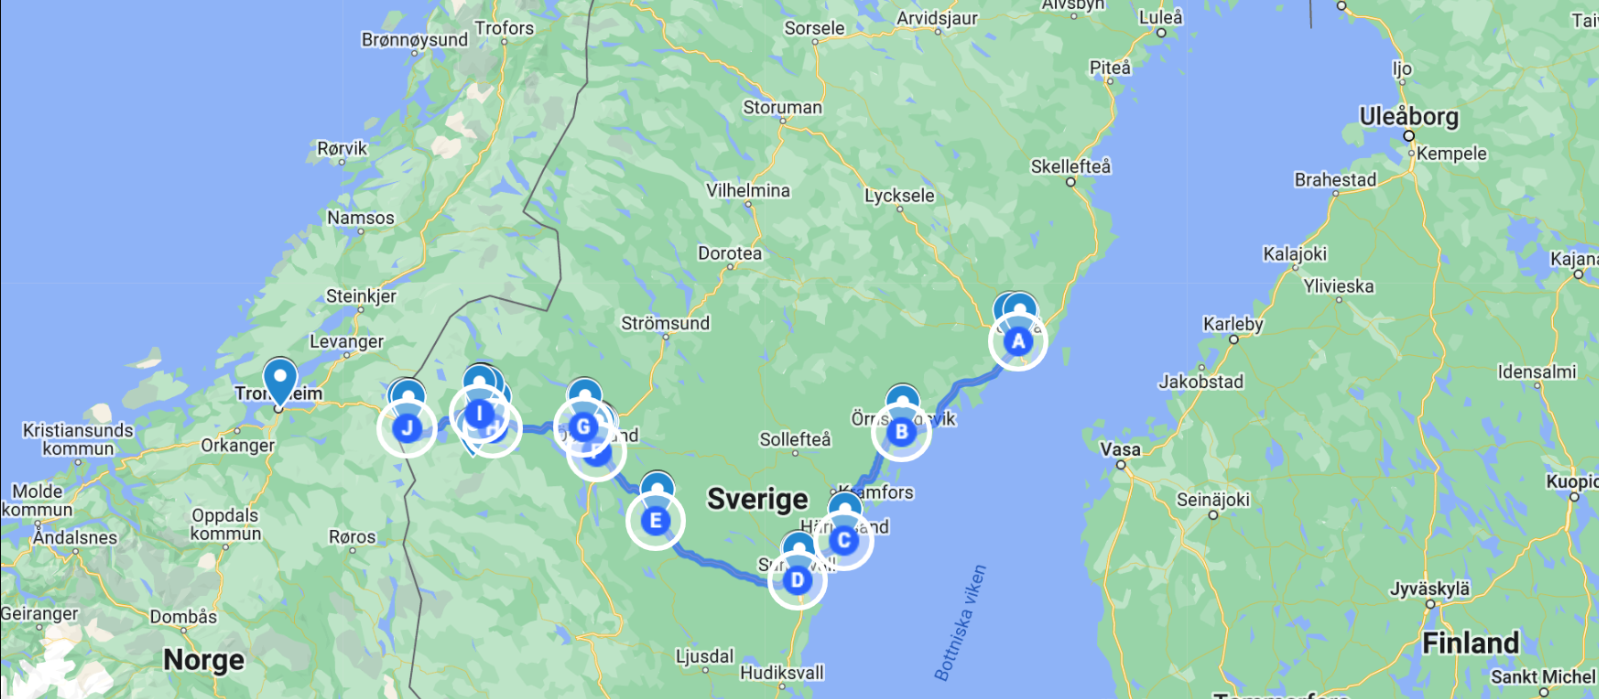 Adventurous family trips - By train from the coast to the Swedish mountains. Google Maps